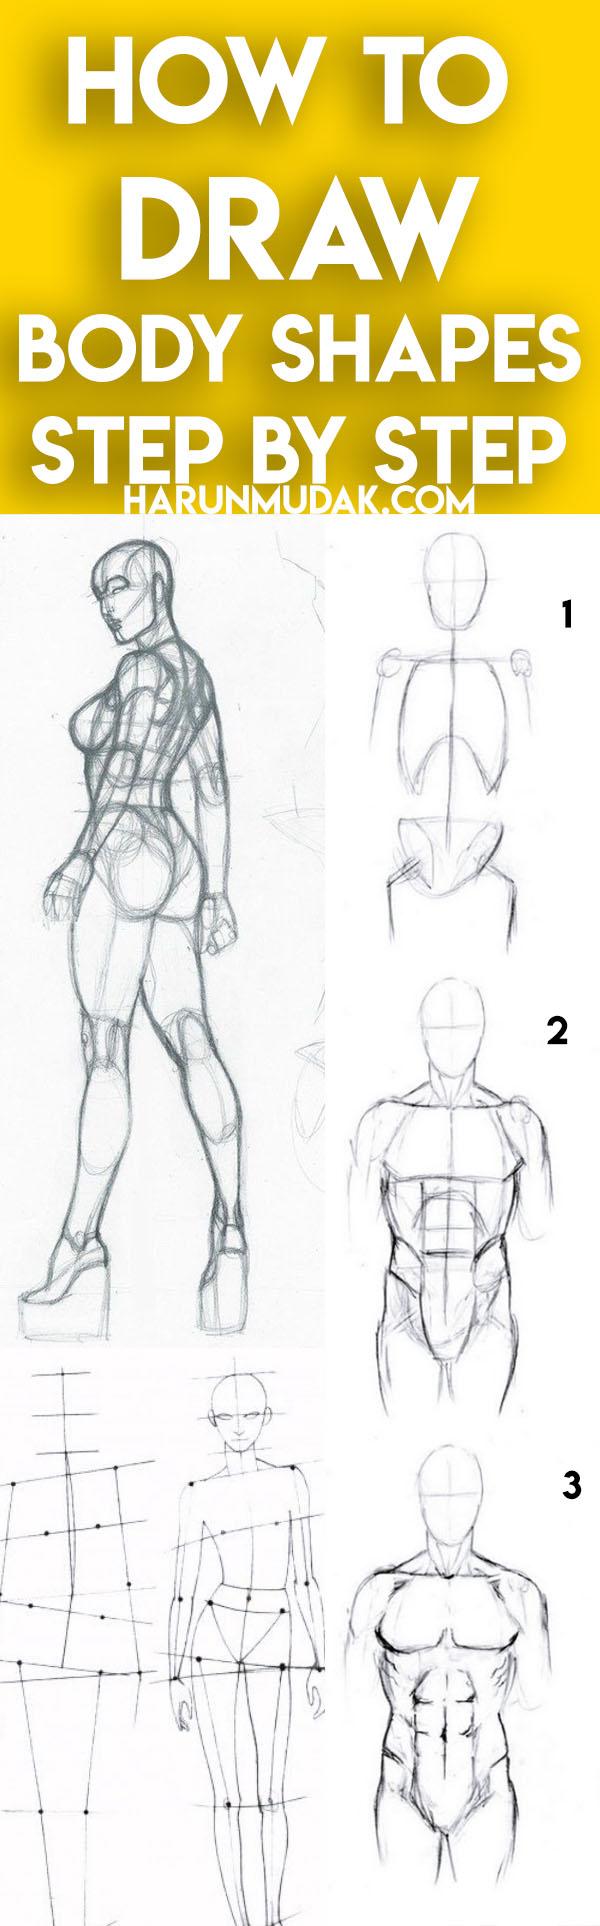 20+ How to Draw Body Shapes Step by Step HARUNMUDAK